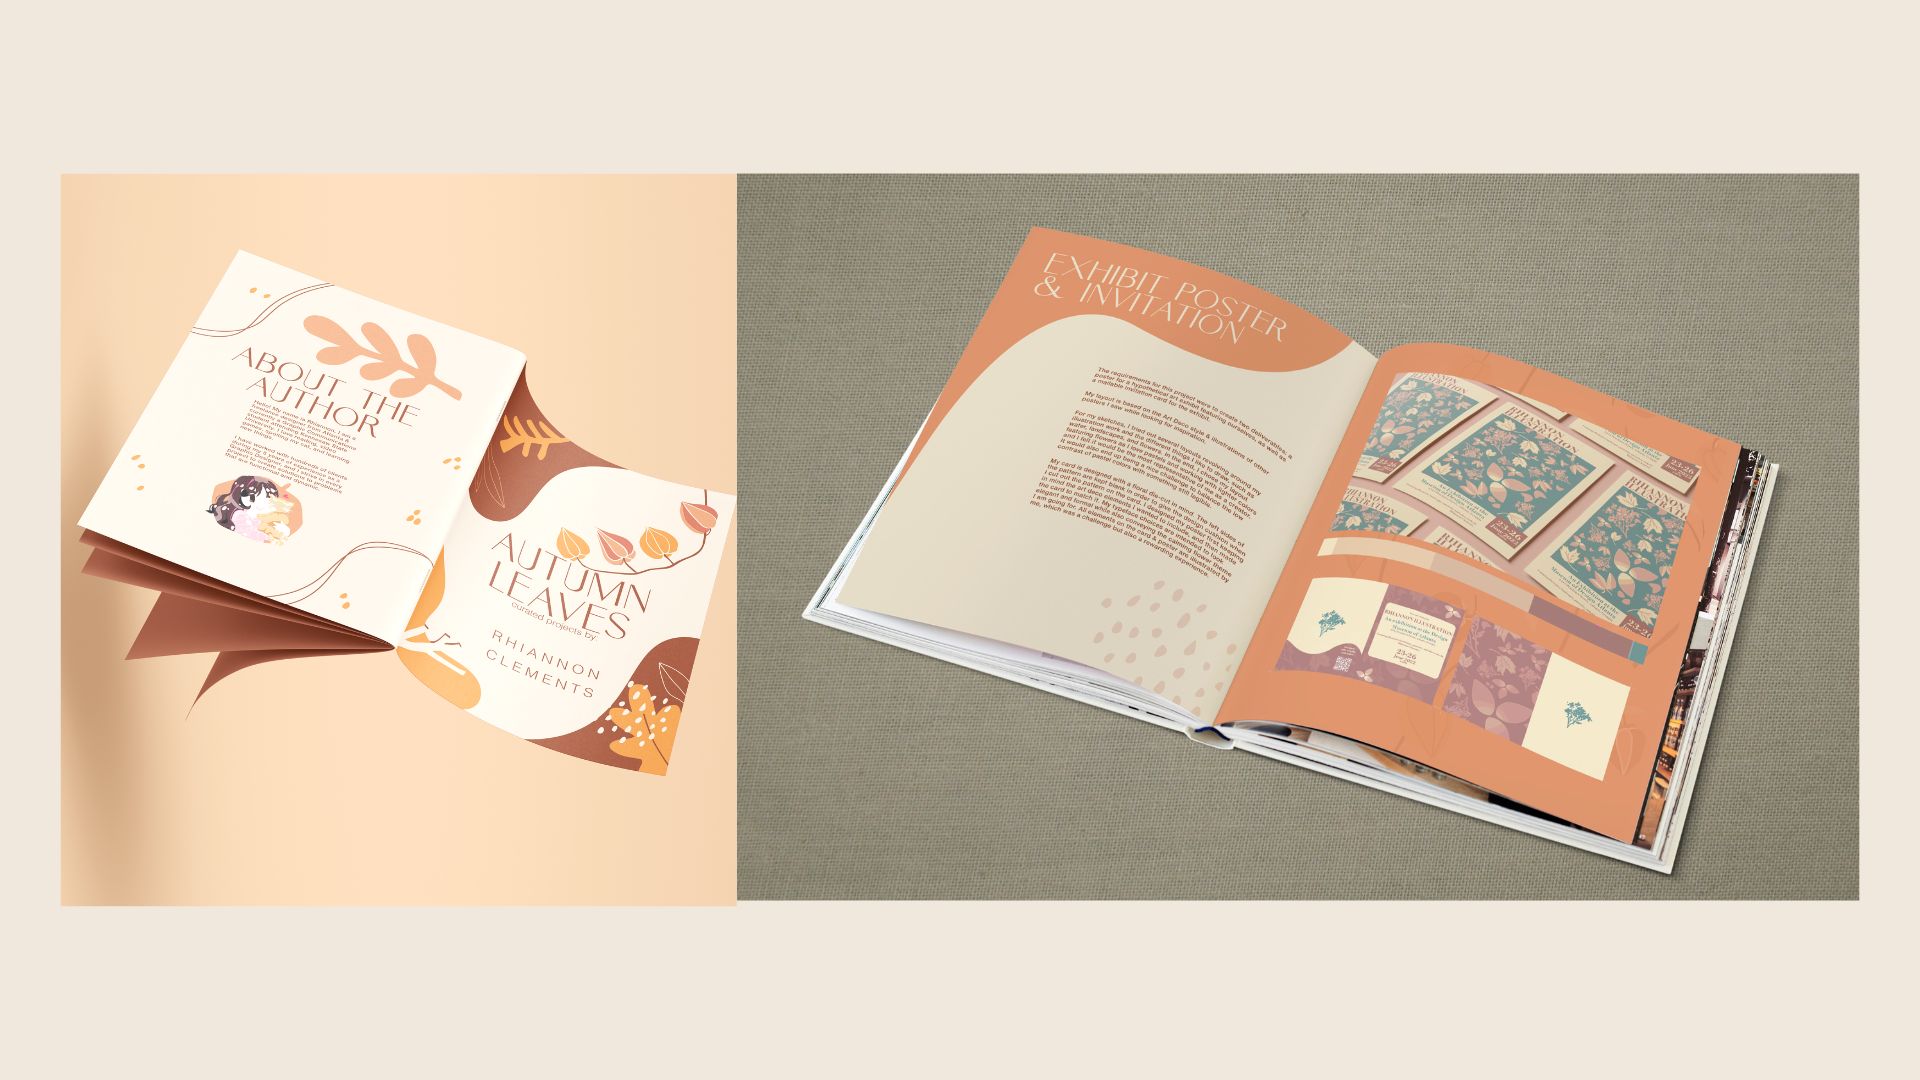 "Autumn Leaves: Coffee Book" / "Autumn Leaves: Coffee Book", booklet layout design, 8.5x11 print booklet, 2022. This booklet highlights some of the projects I completed in my college senior year with an autumn-themed layout.

